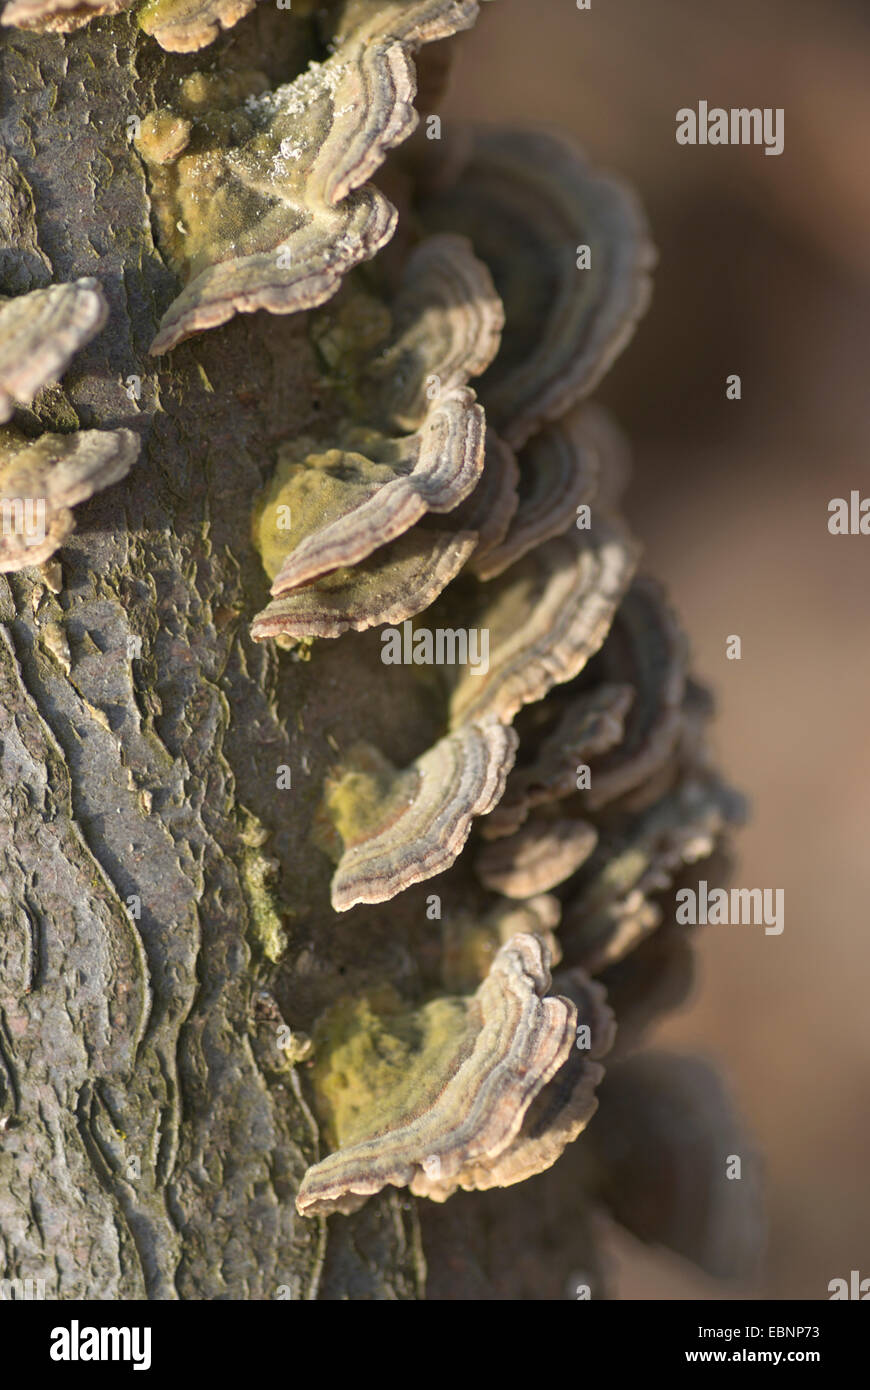 Turkey tail, Turkeytail, Many-zoned Bracket, Wood Decay (Trametes versicolor, Coriolus versicolor), several fruiting bodies at a tree trunk, Germany Stock Photo